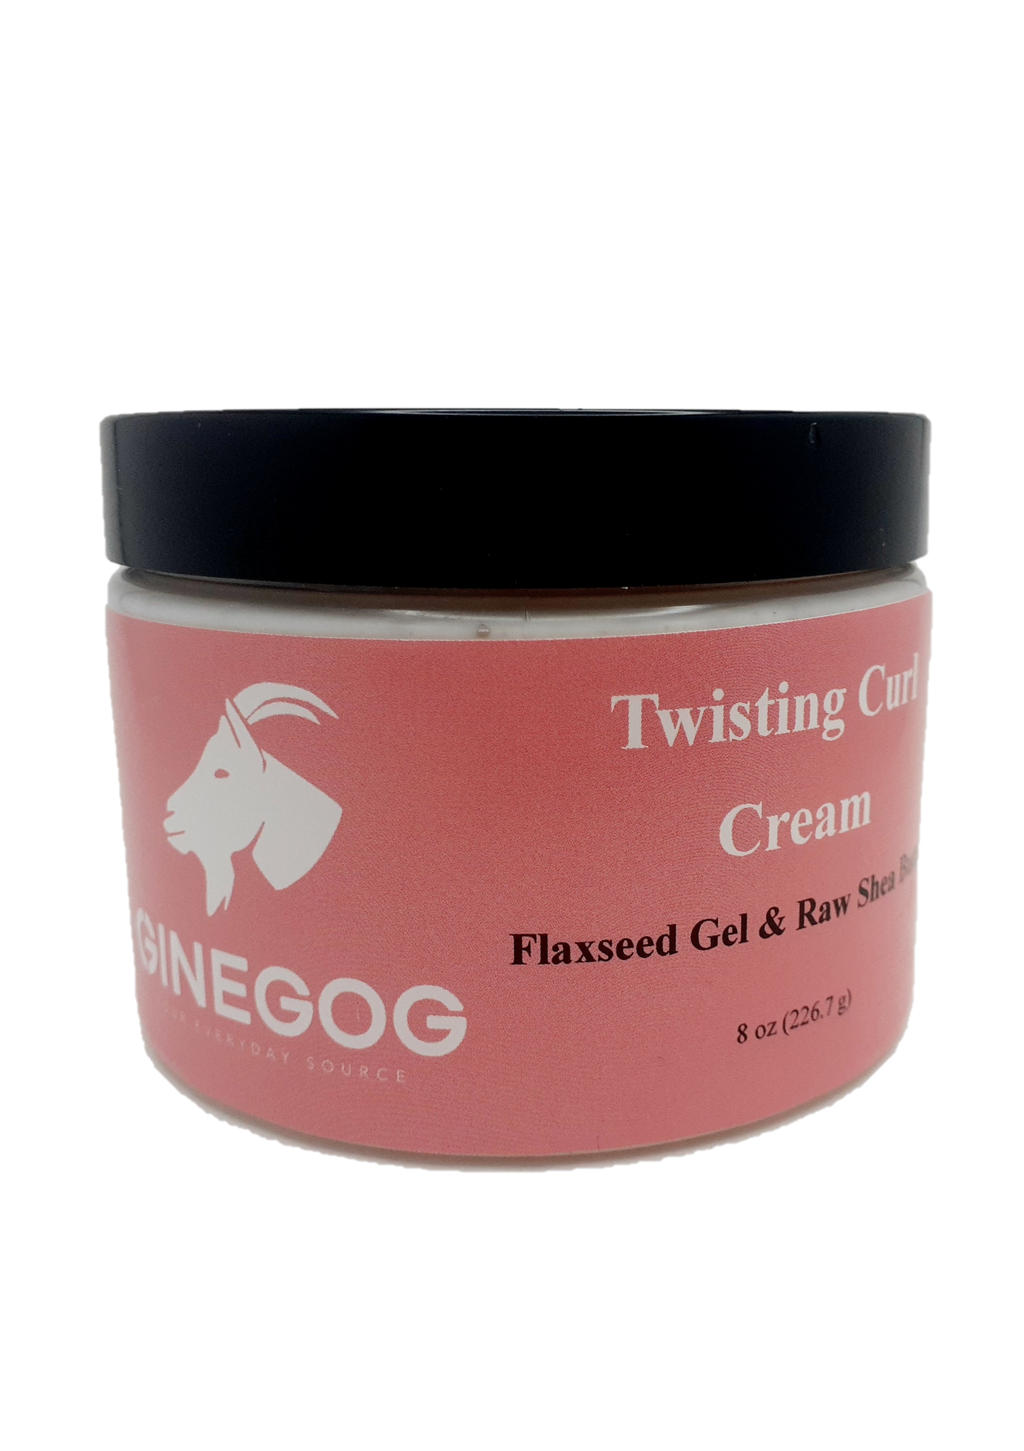 GINEGOG TWISTING CURL CREAM with Flaxseed Gel & Shea Butter